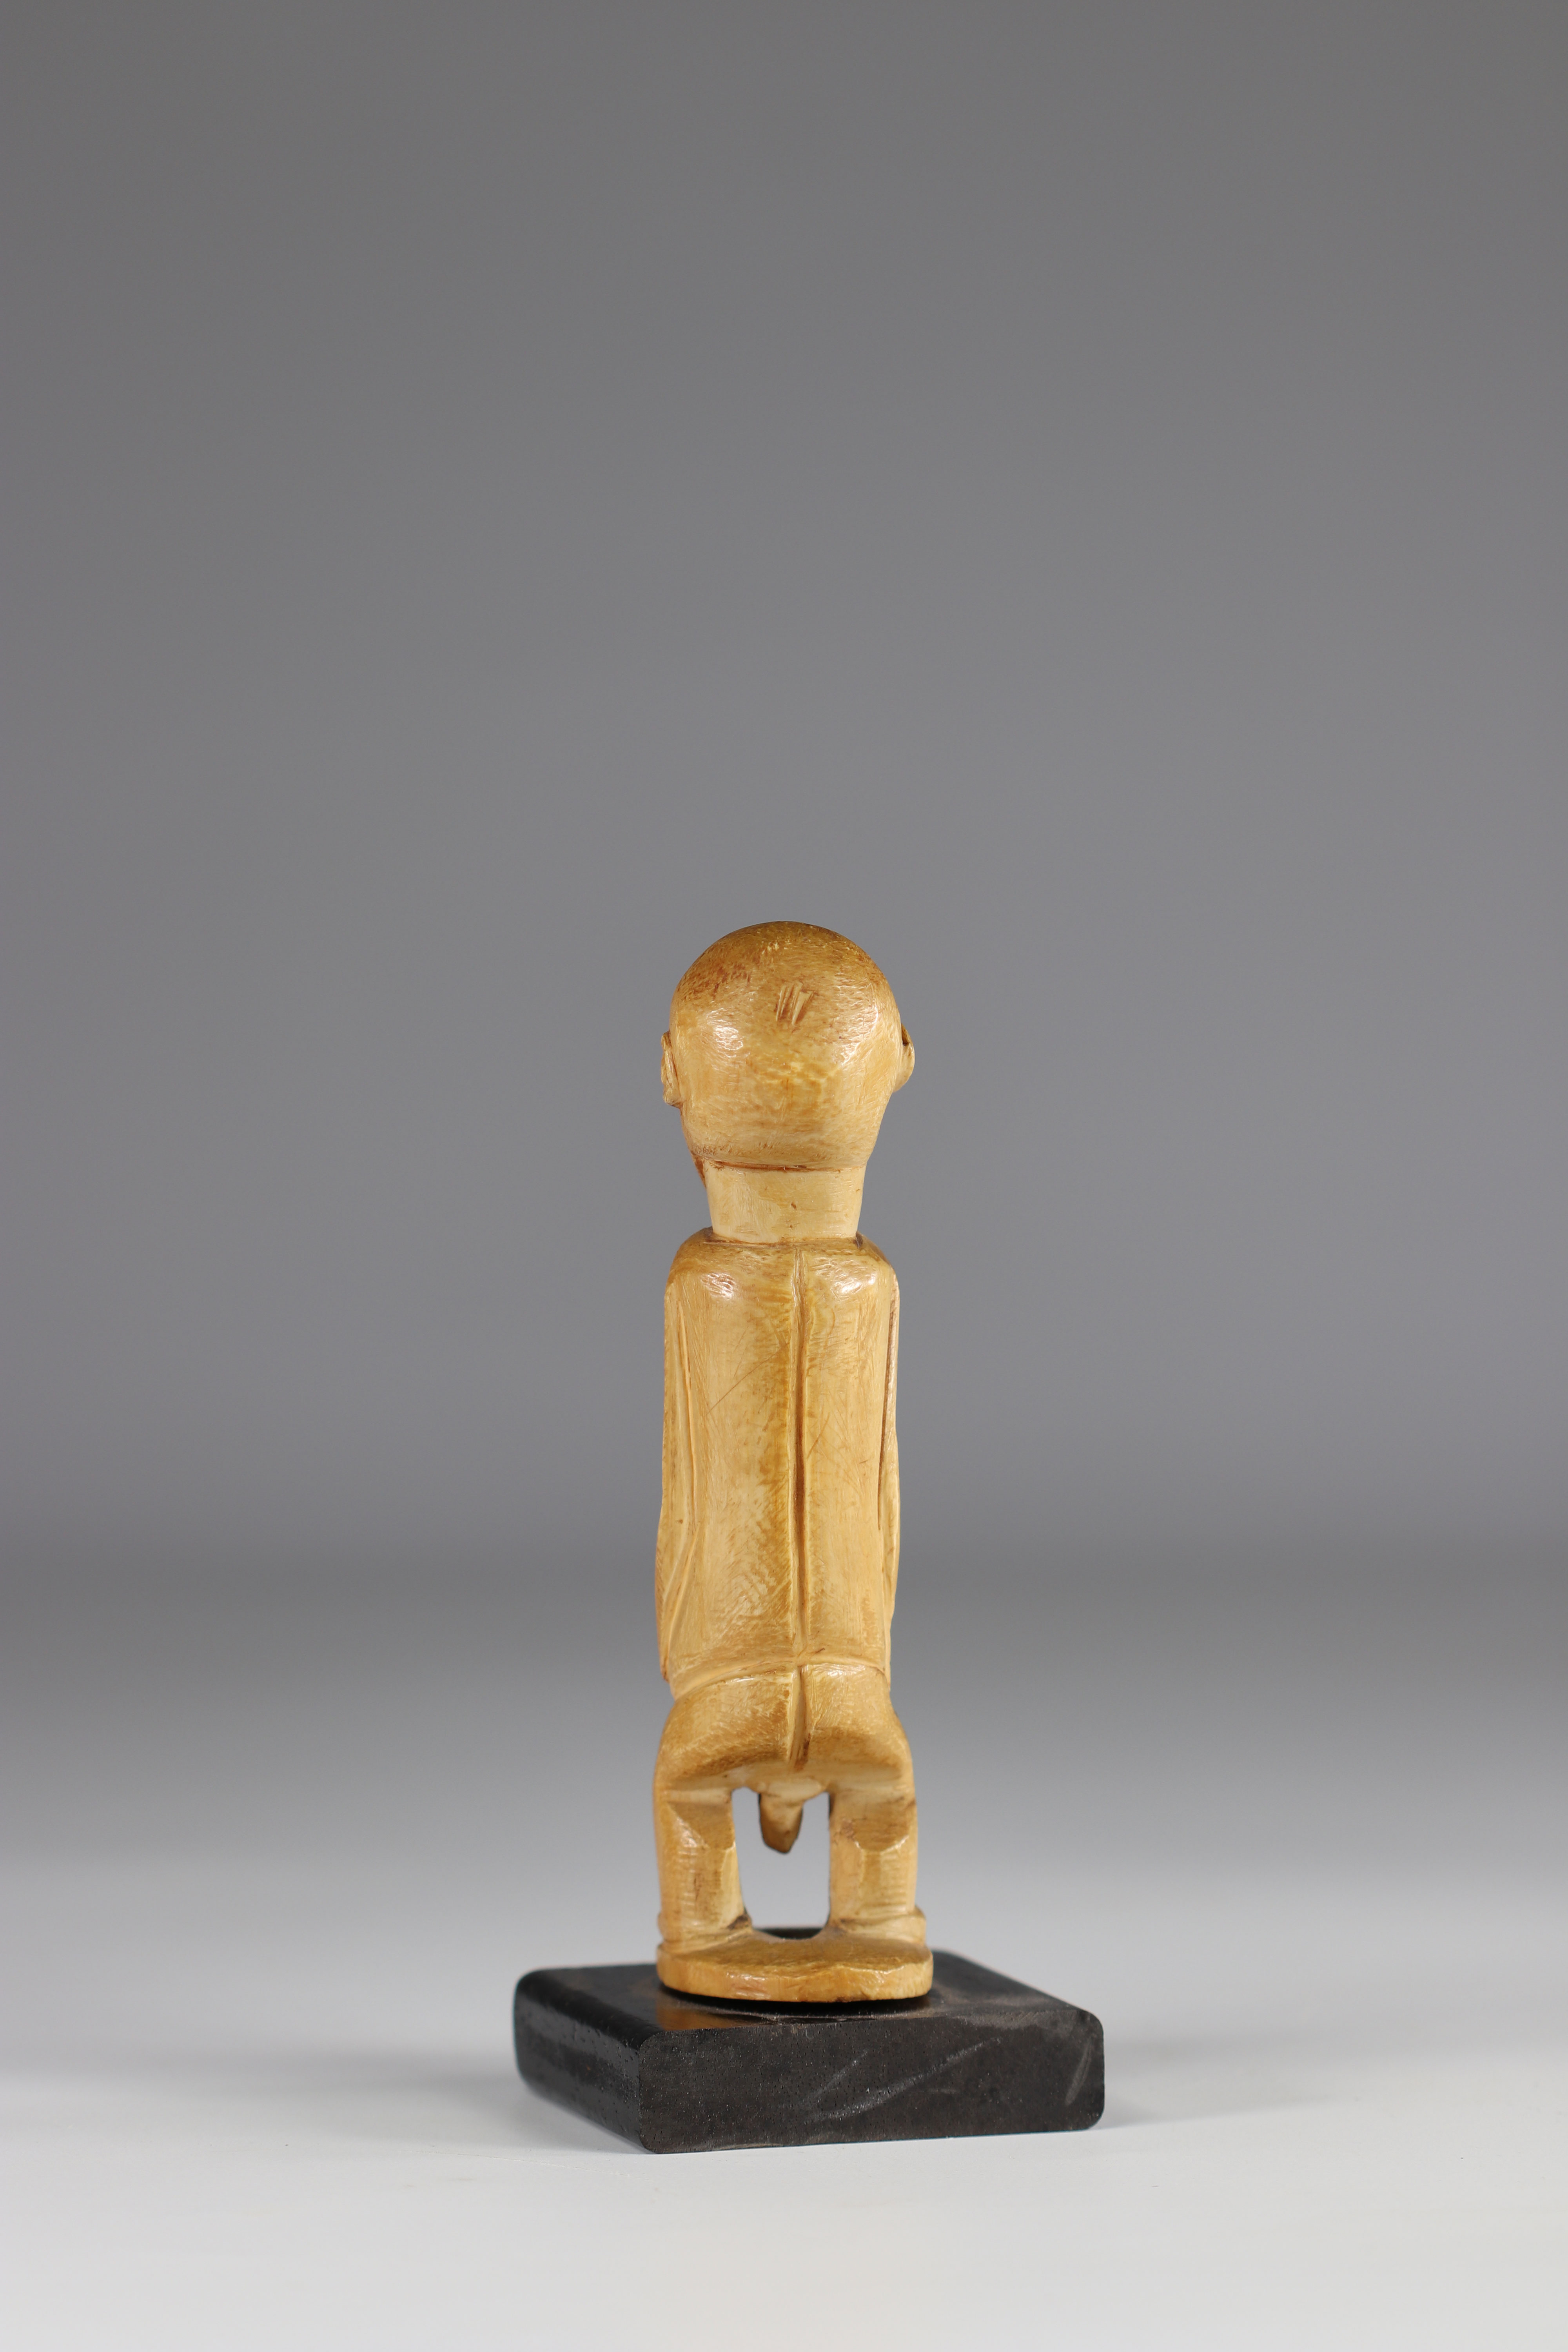 Boyo statuette - ivory - beautiful patina - coll. private Belgian - early 20th century - DRC - Afric - Image 2 of 4